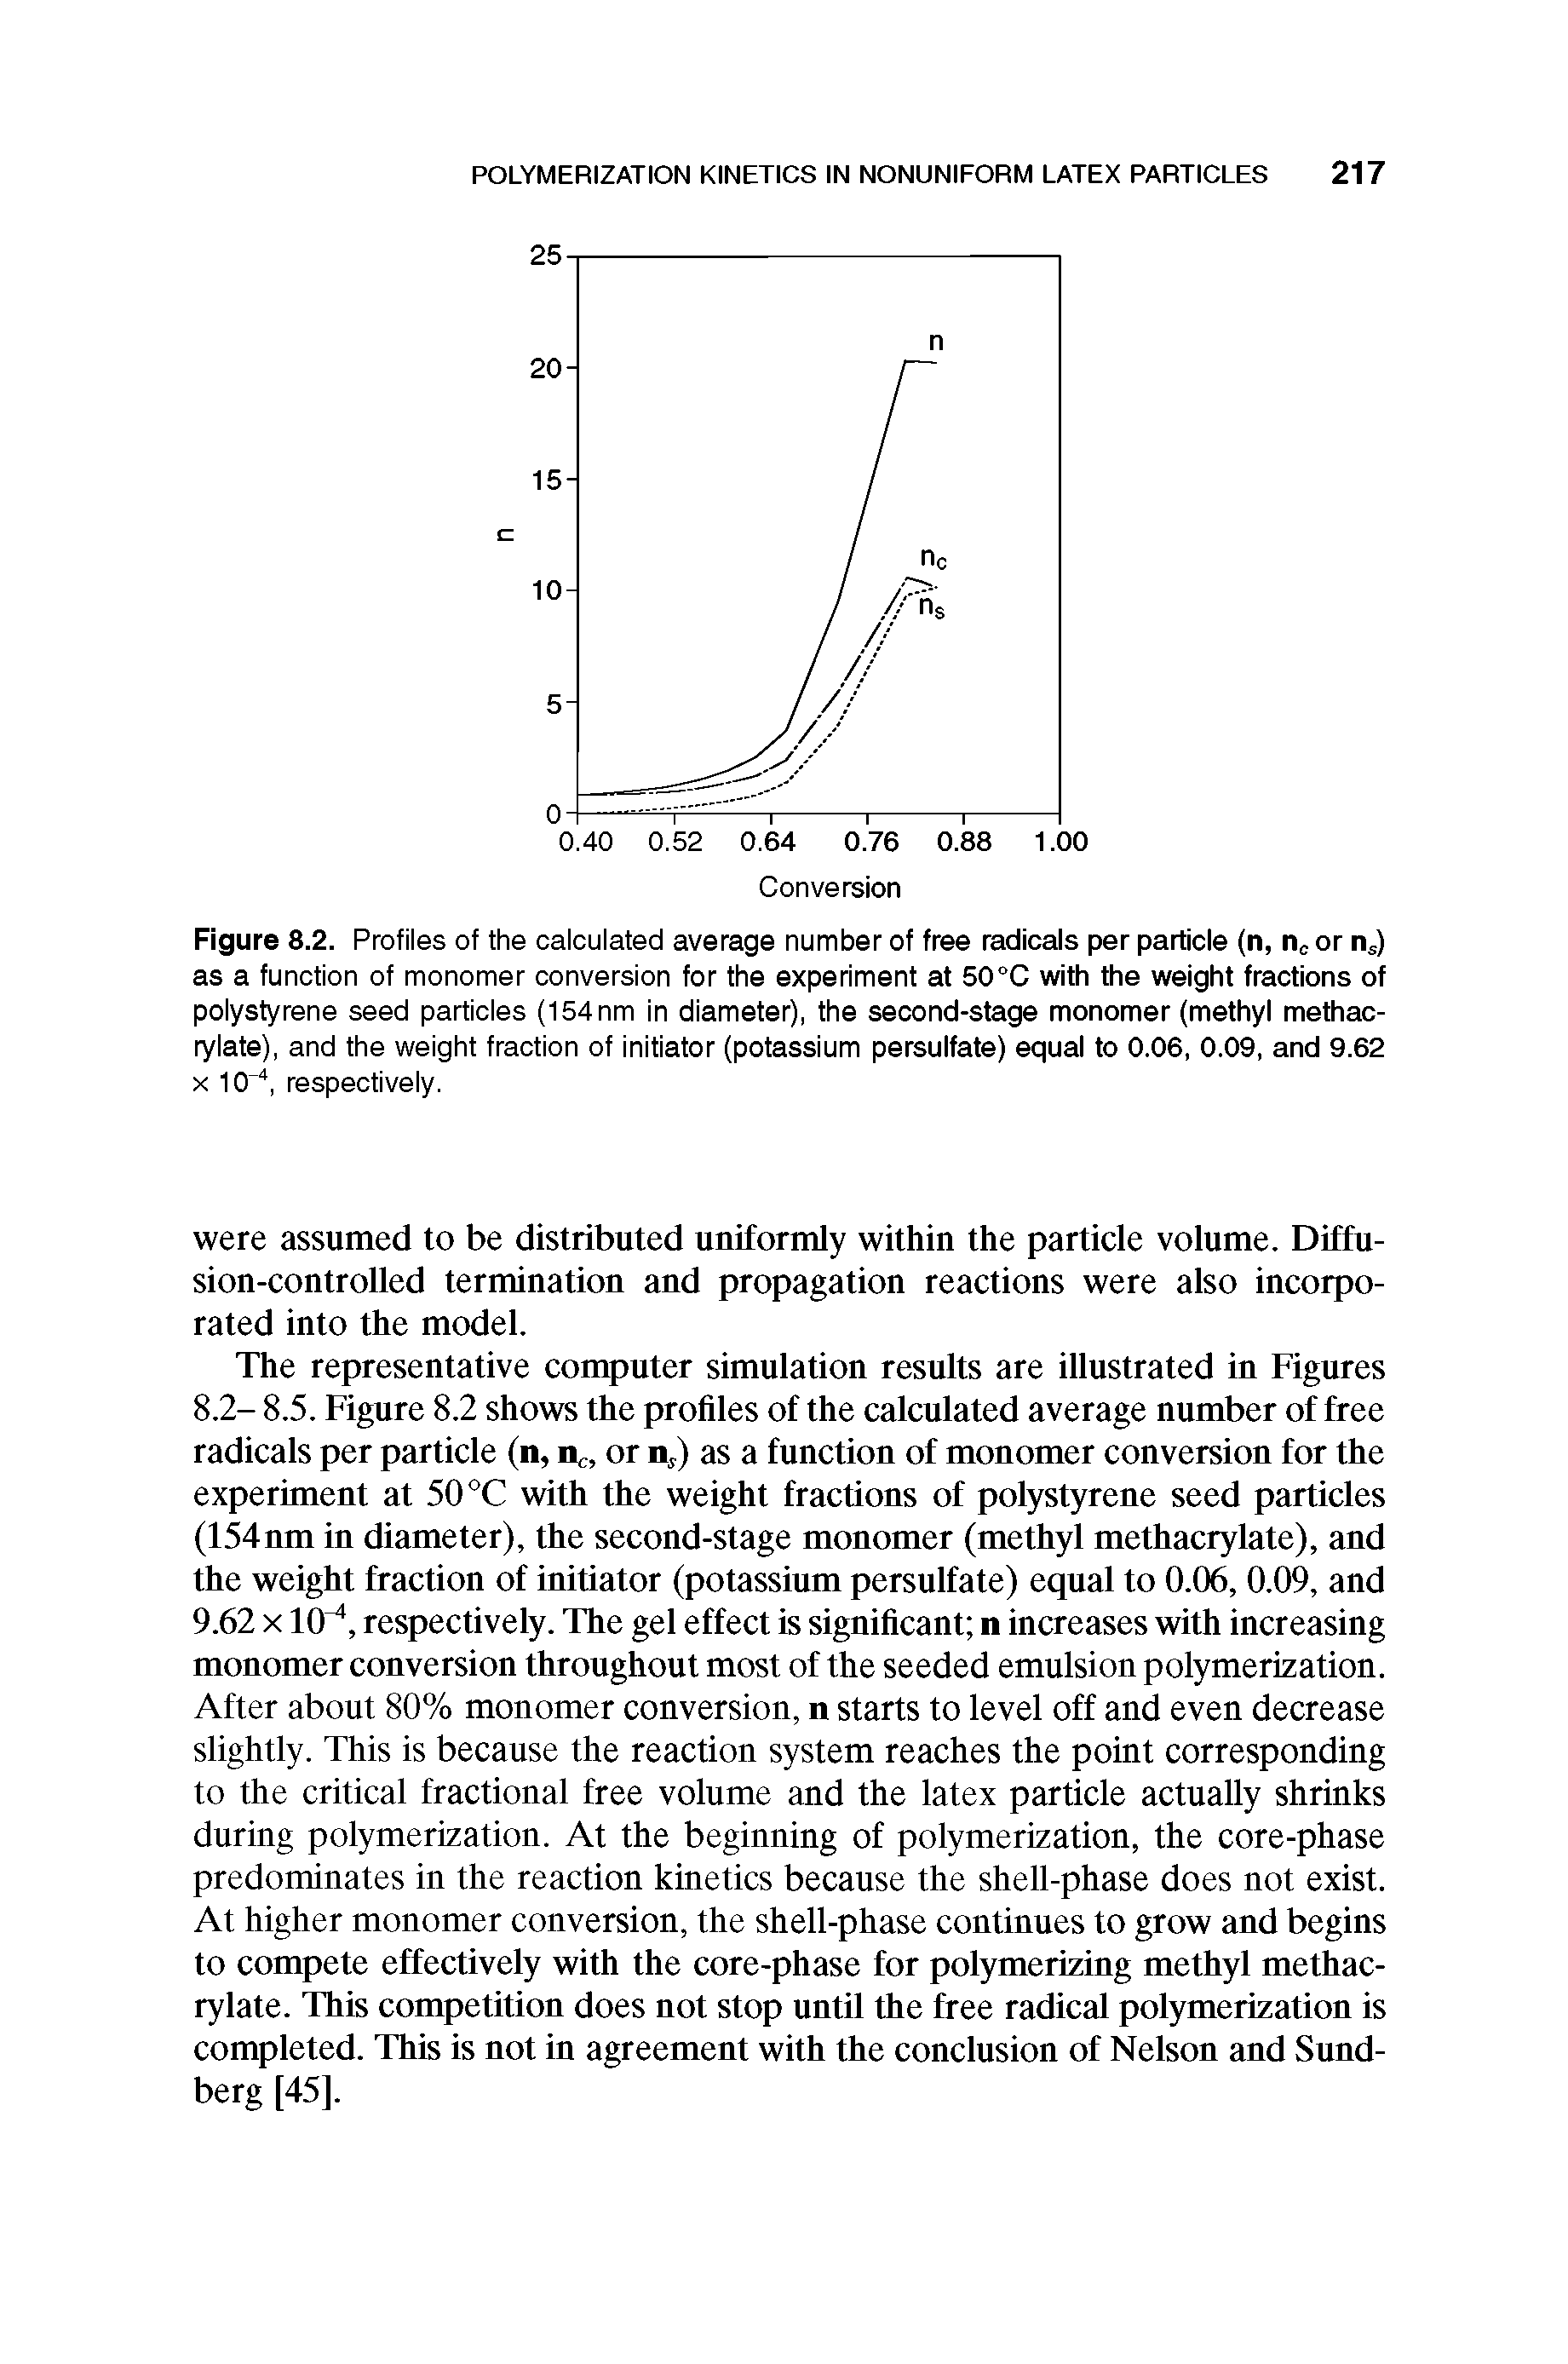 Figure 8.2. Profiles of the calculated average number of free radicals per particle (n, or n ) as a function of monomer conversion for the experiment at SCC with the weight fractions of polystyrene seed particles (154nm in diameter), the second-stage monomer (methyl methacrylate), and the weight fraction of initiator (potassium persulfate) equal to 0.06, 0.09, and 9.62 X 10 , respectively.